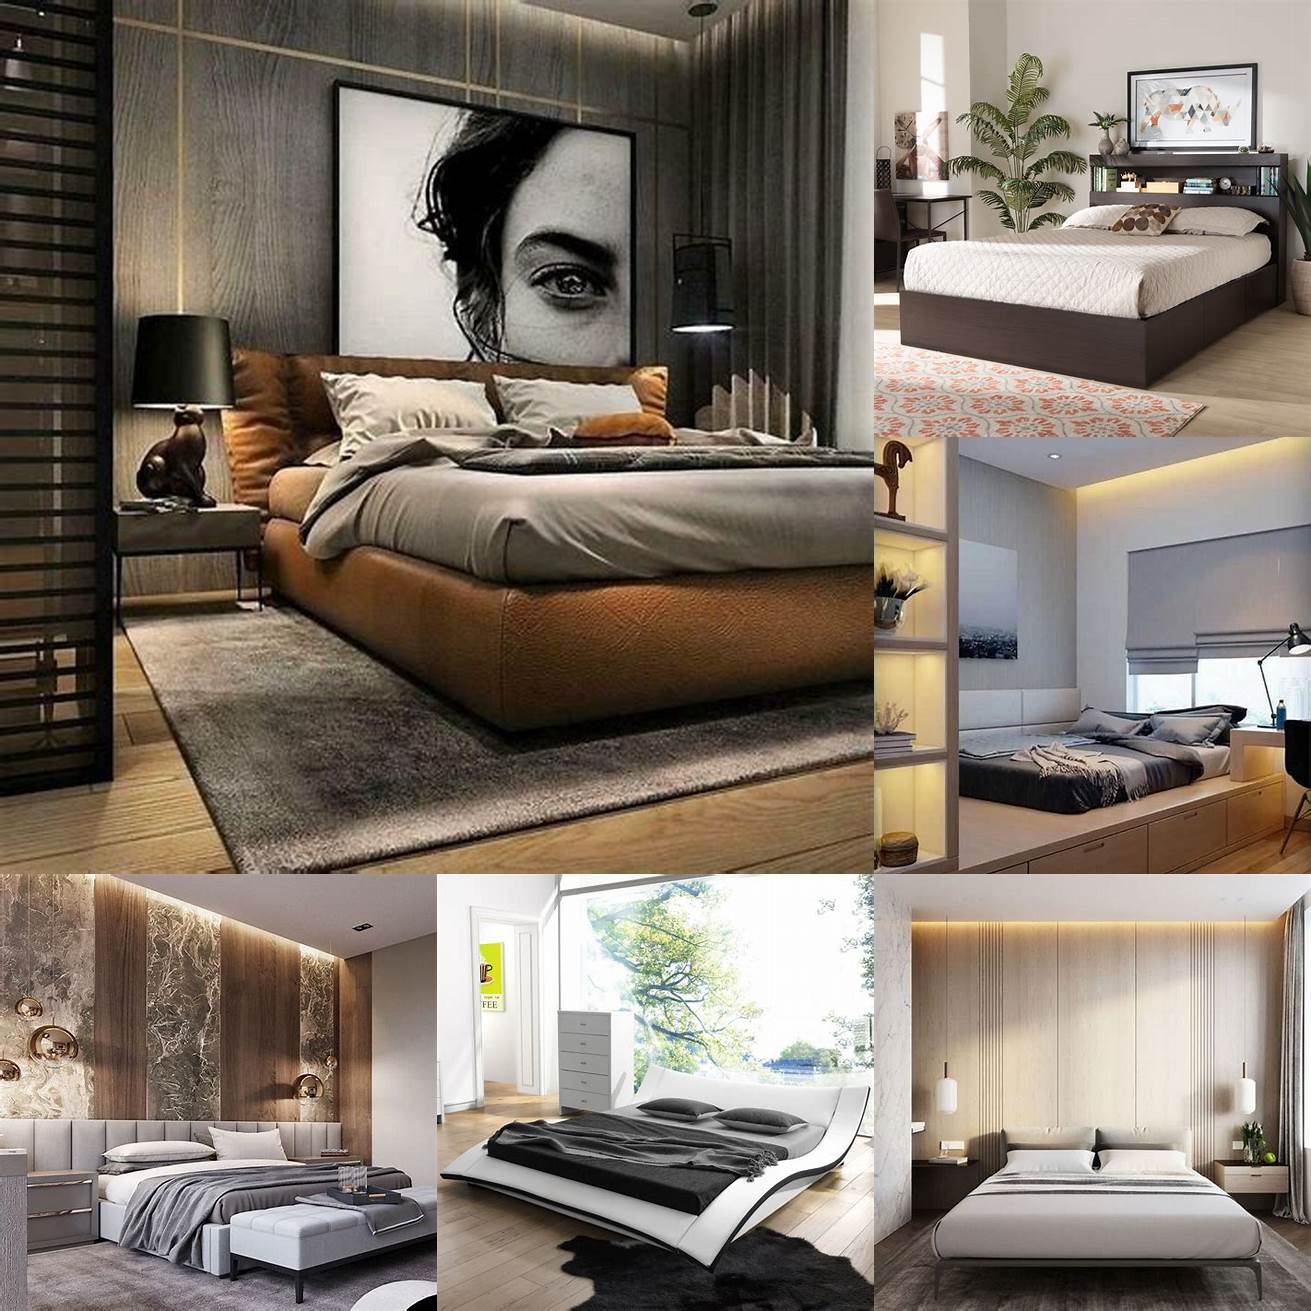 Modern design Platform beds have a modern sleek and minimalist design that can blend in with different bedroom styles